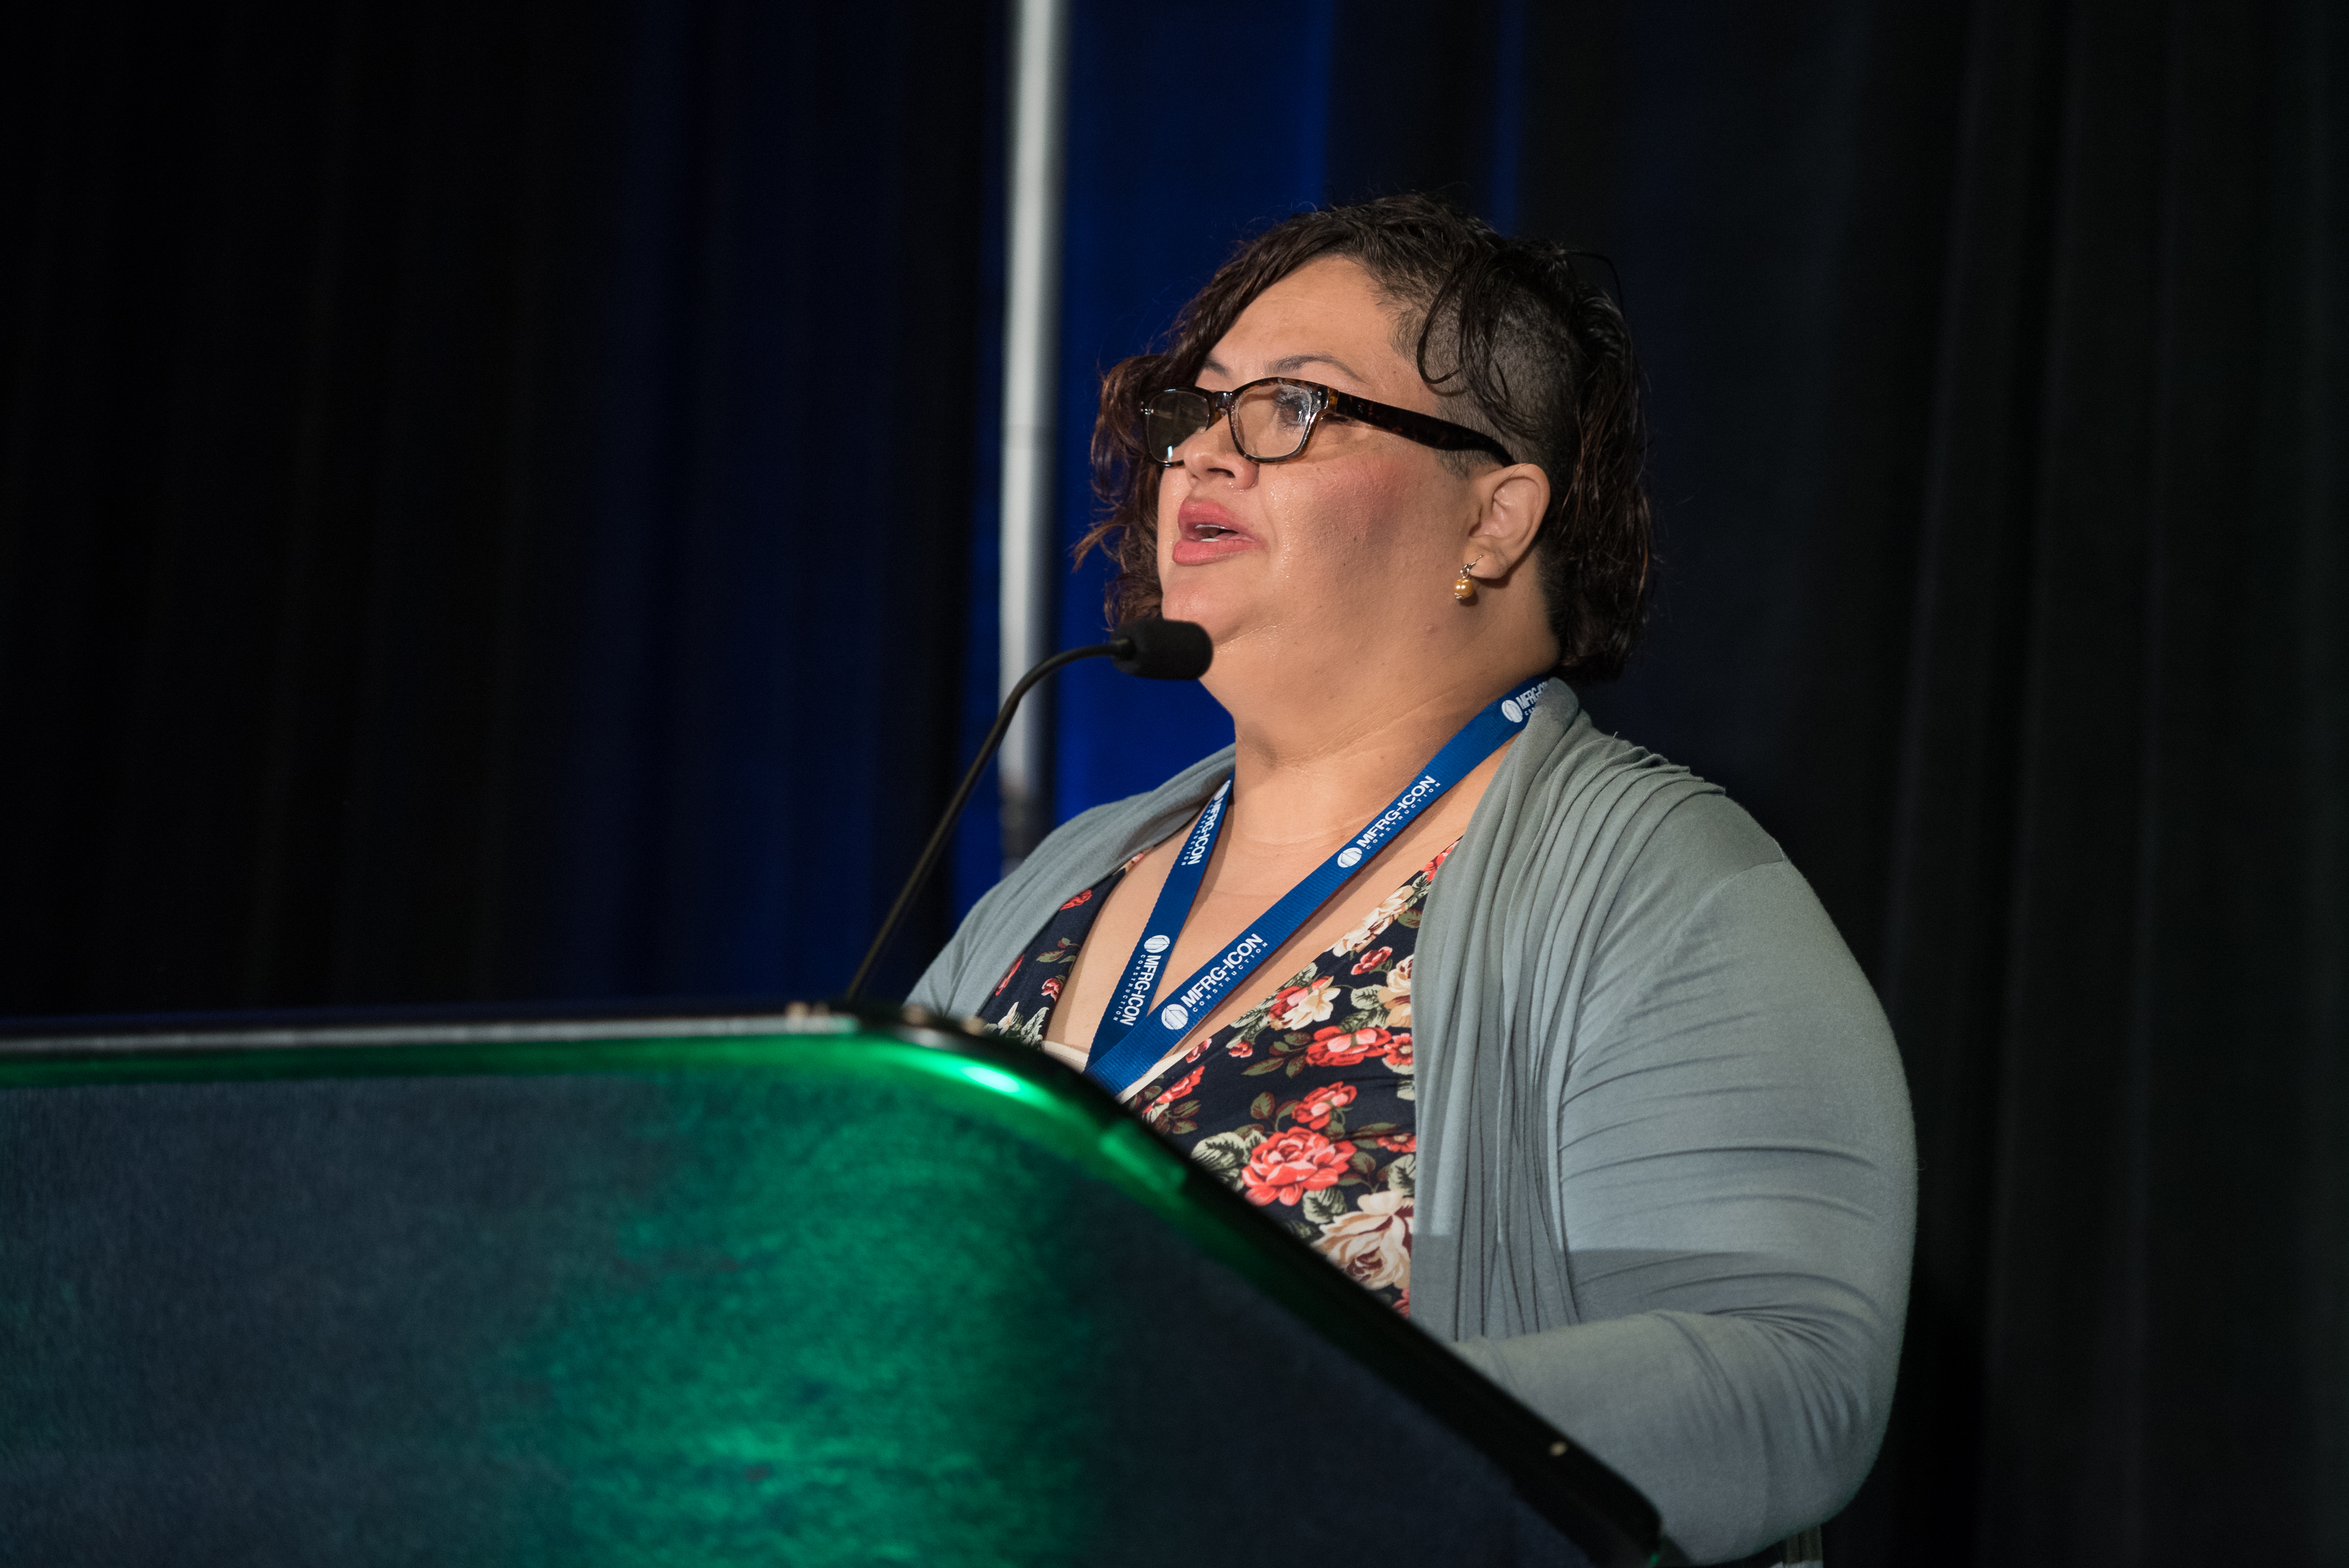 Miriam Rodriguez, RUN member of San Diego speaking at the Housing California Annual conference in March of 2018